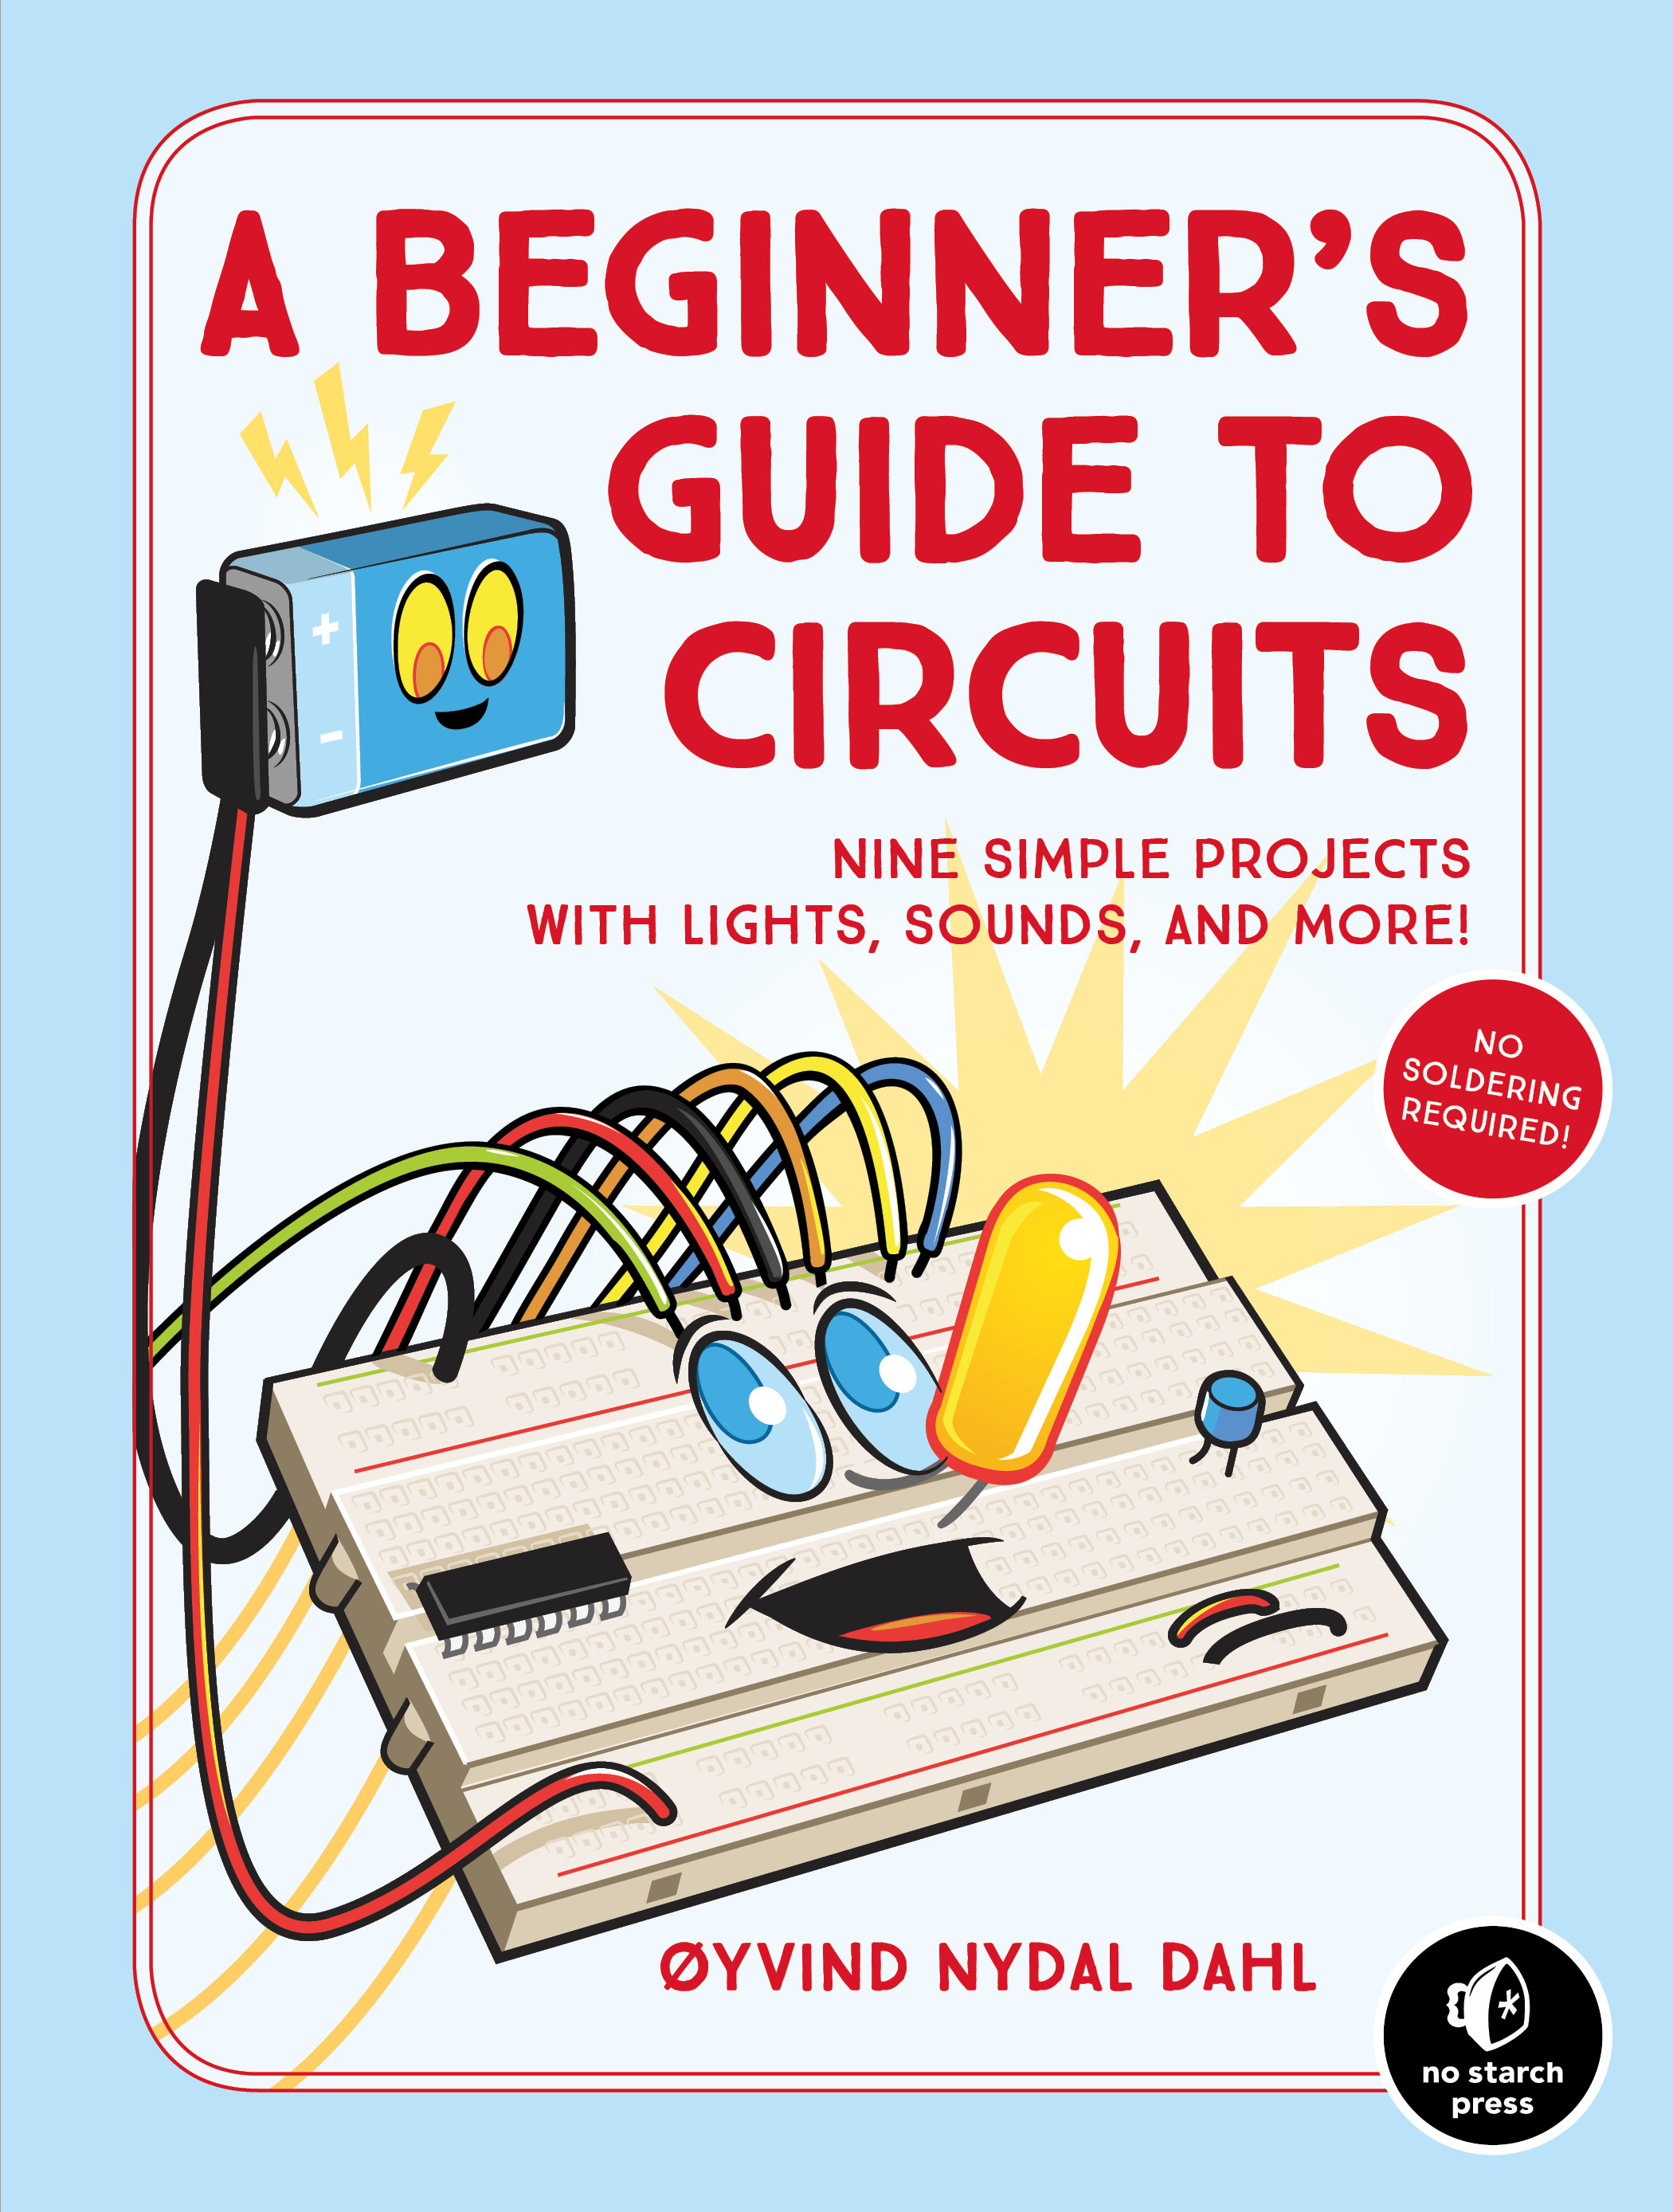 A Beginner’s Guide to Circuits